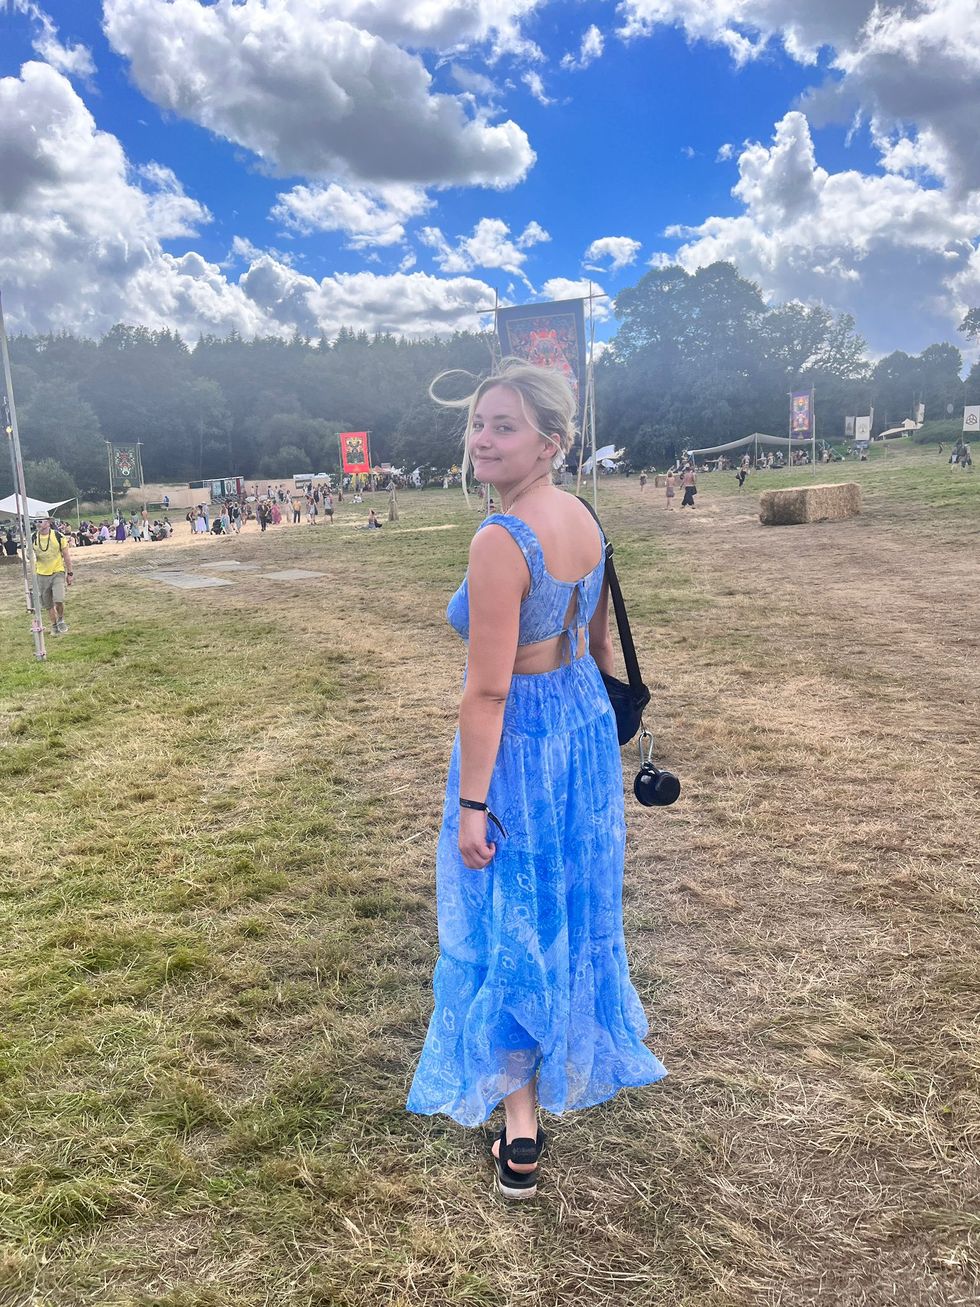 a person in a blue dress